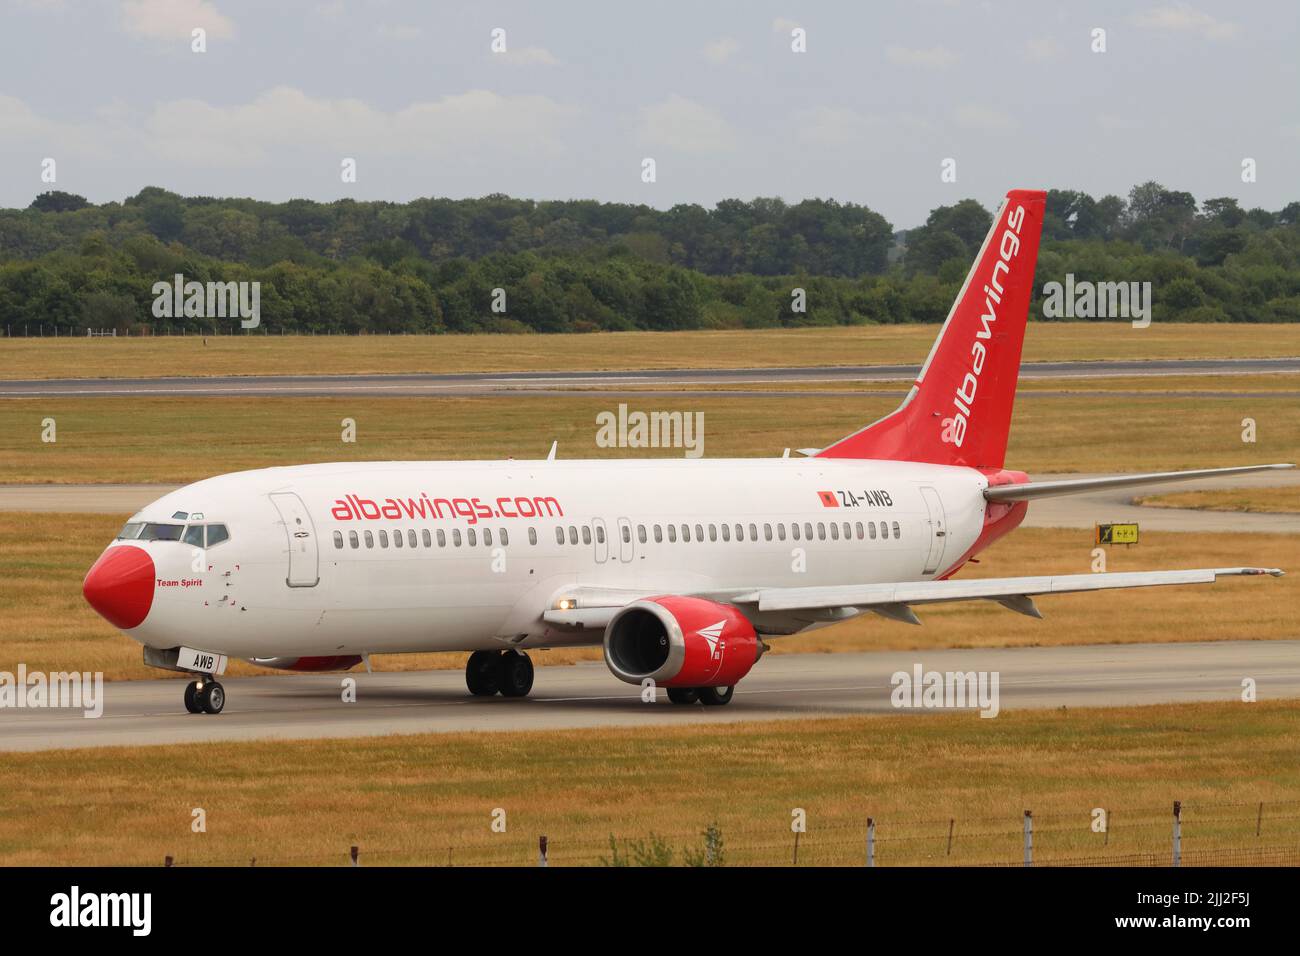 Albawings, Boeing 737 ZA-AWB, departing Stansted Airport, Essex, UK Stock Photo